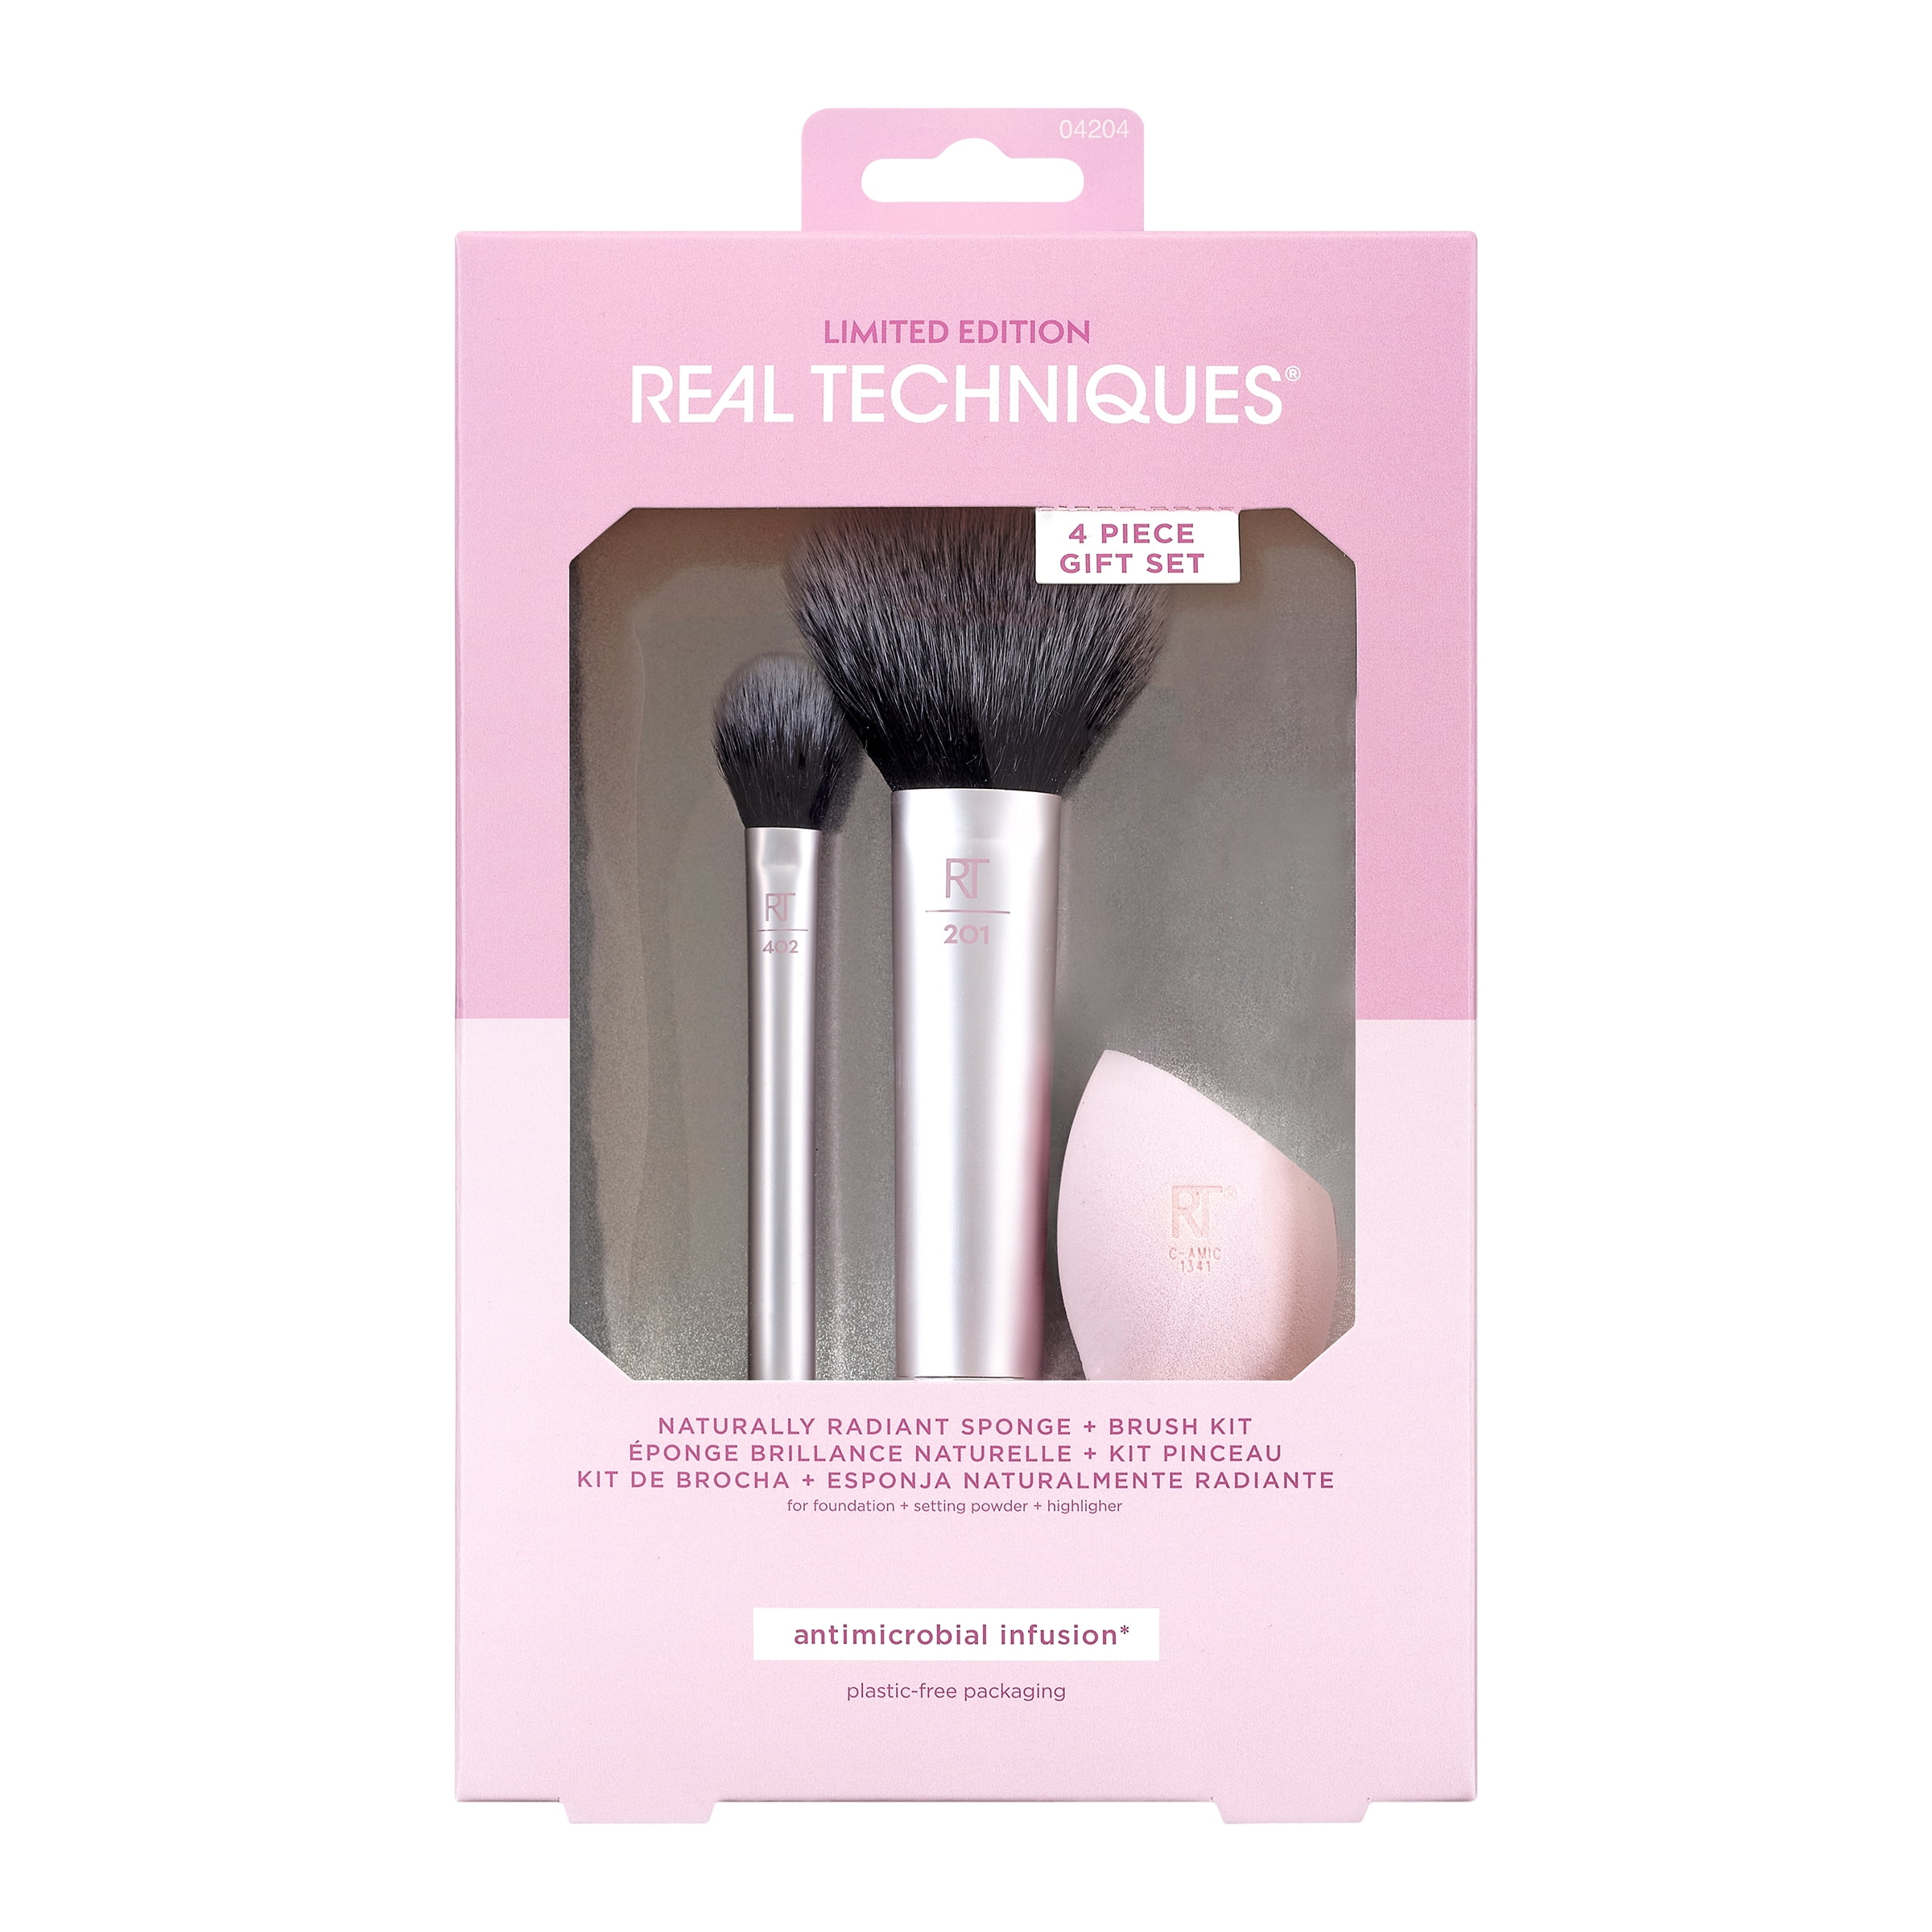 Real Techniques Limited Edition Naturally Radiant Sponge and Brush Kit,  Piece Gift Set